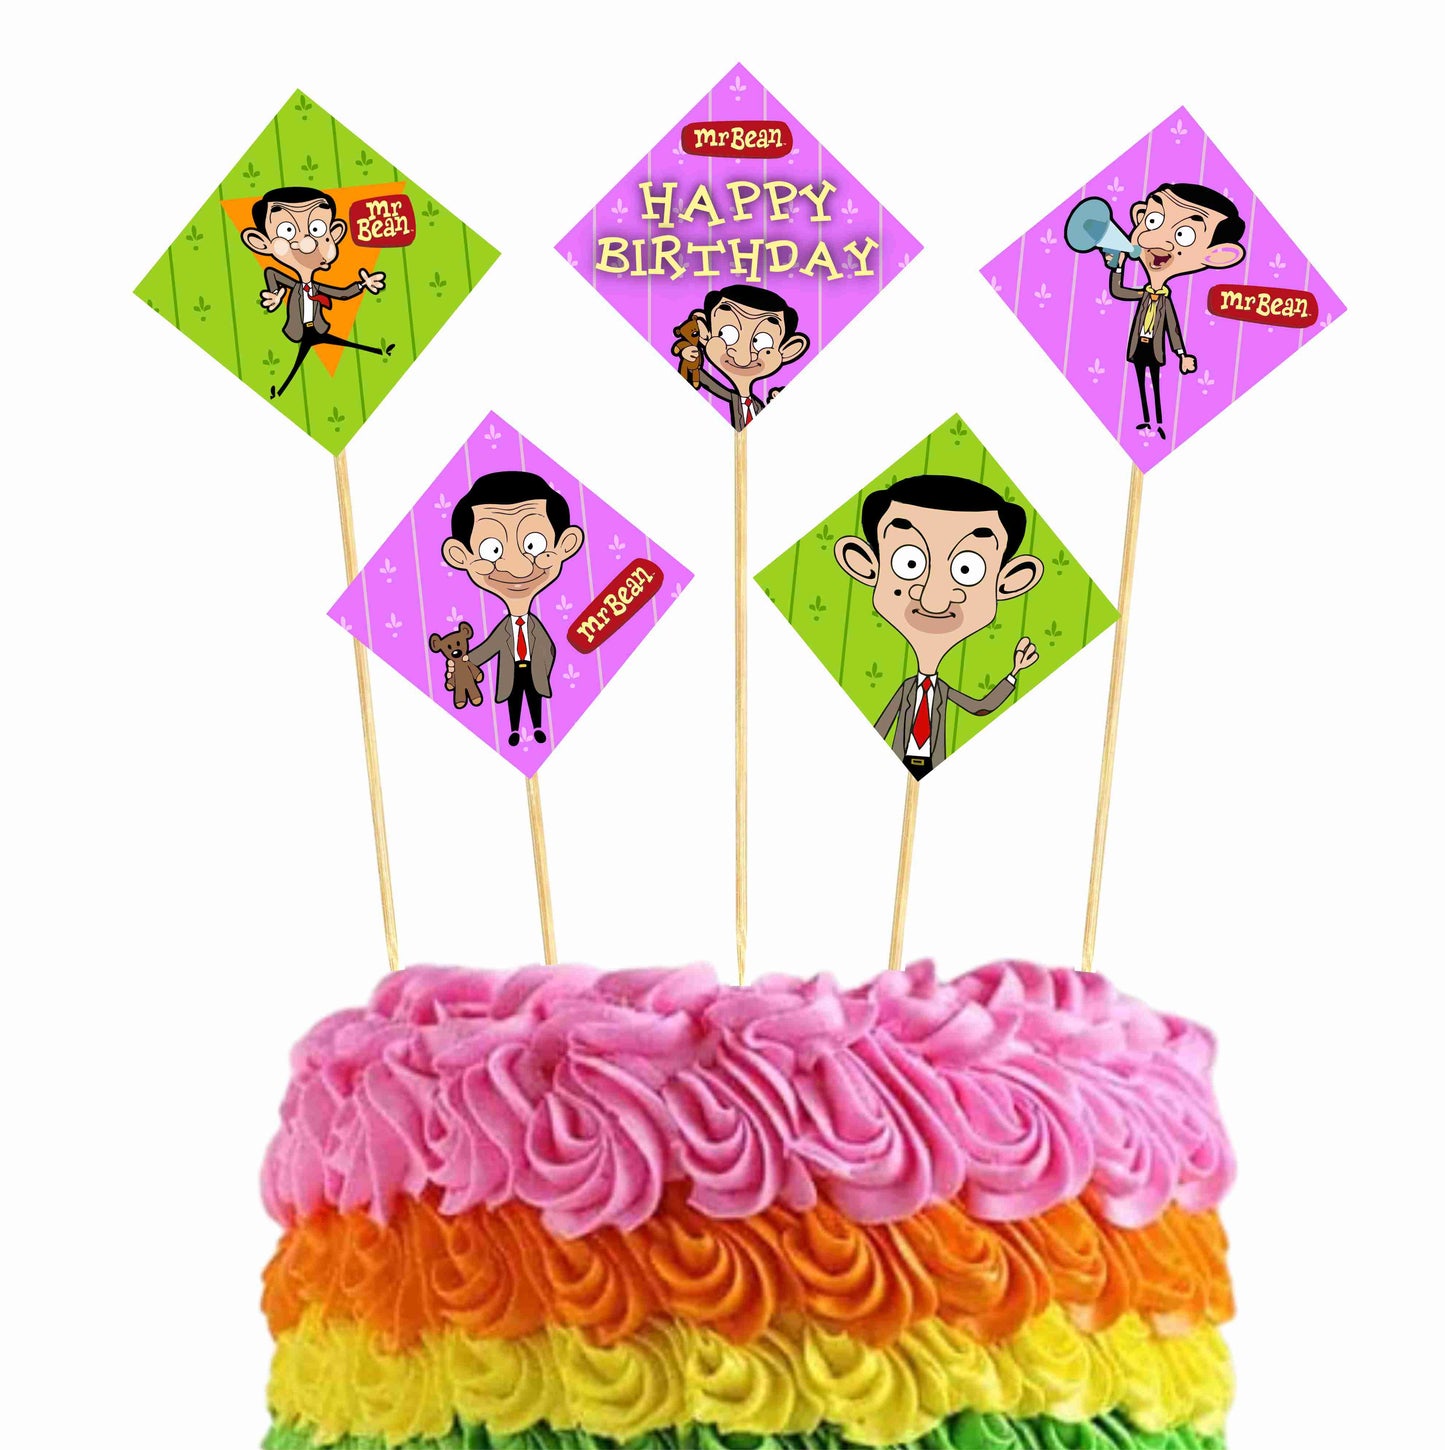 Mr Bean Theme Cake Topper Pack of 10 Nos for Birthday Cake Decoration Theme Party Item For Boys Girls Adults Birthday Theme Decor